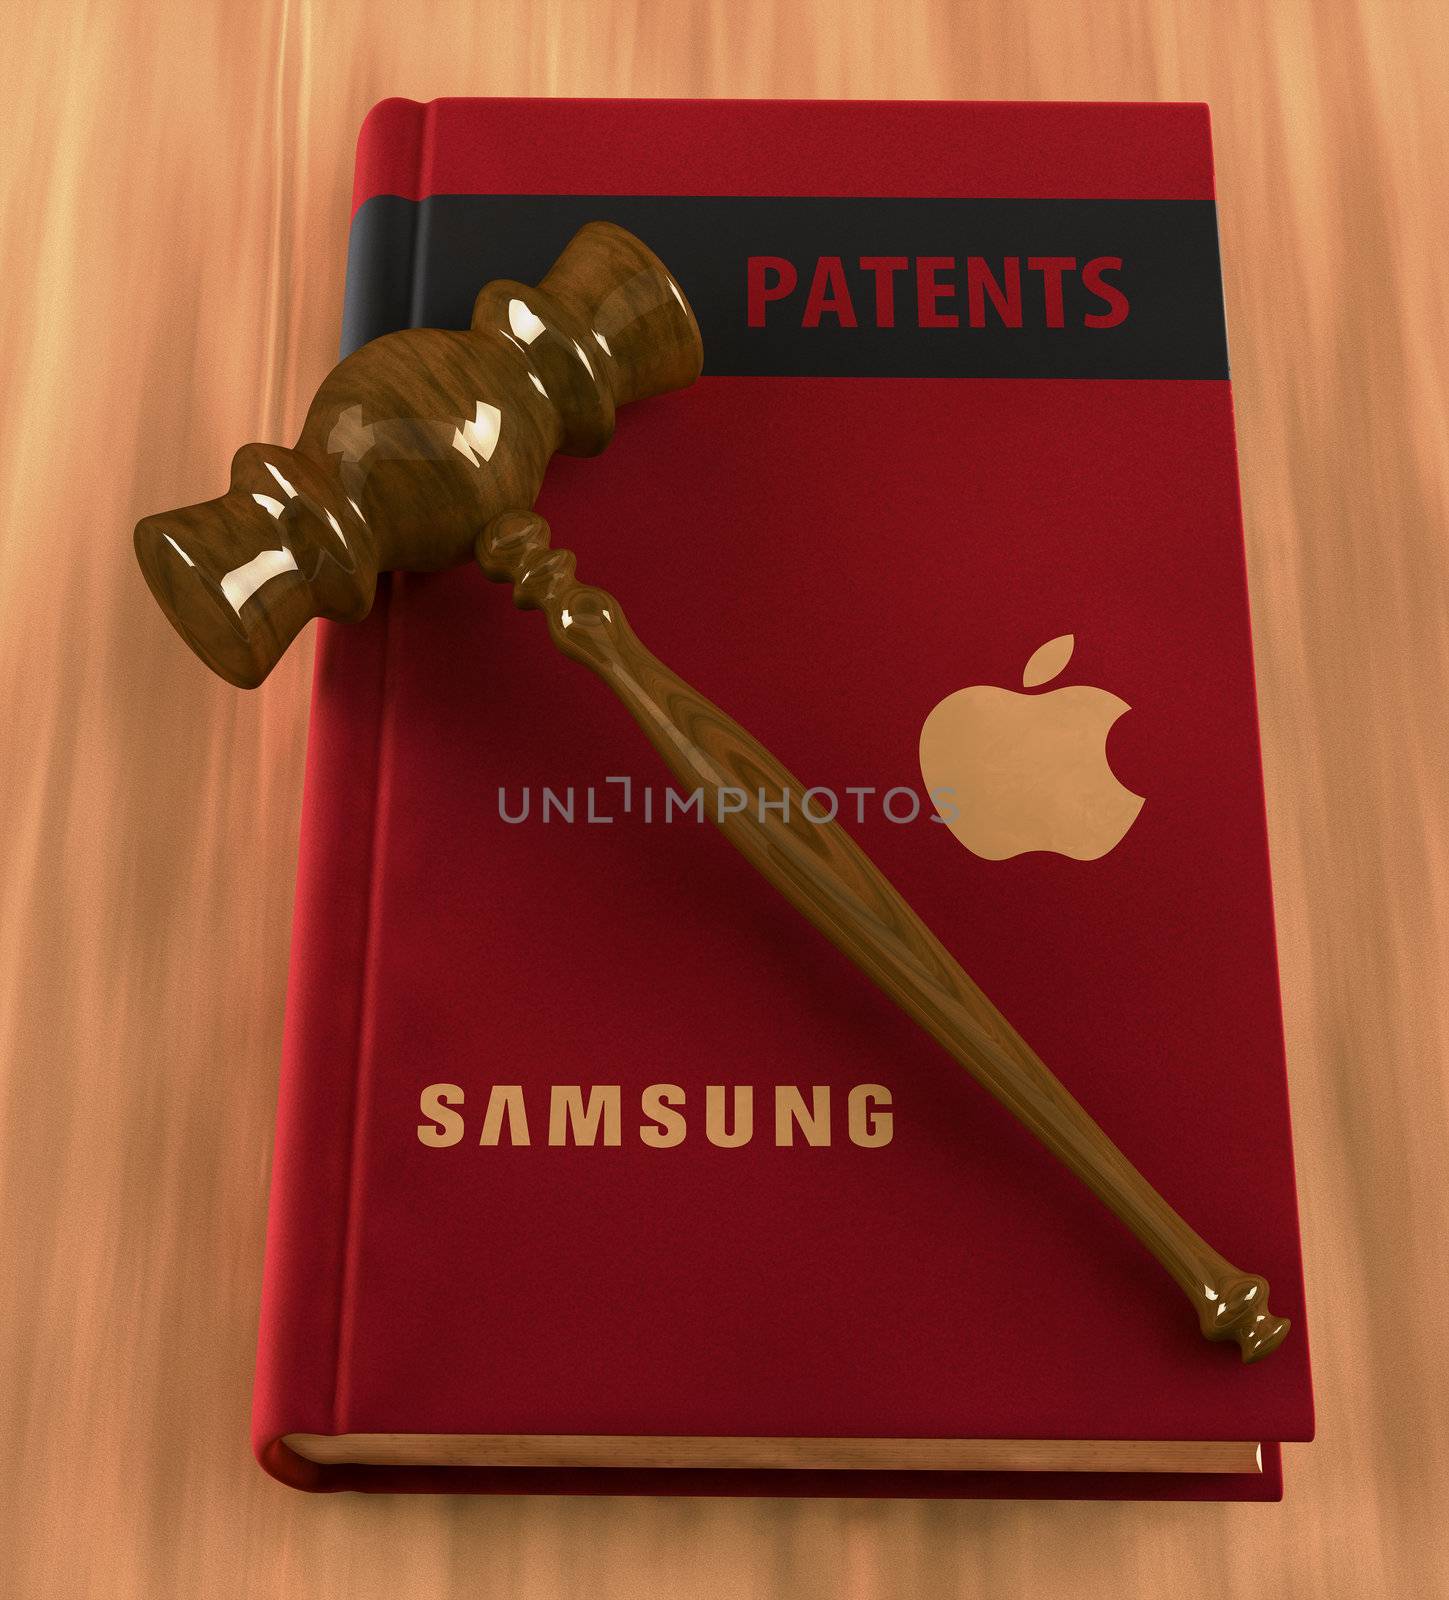 Gavel on a book of patents by gorgrigo